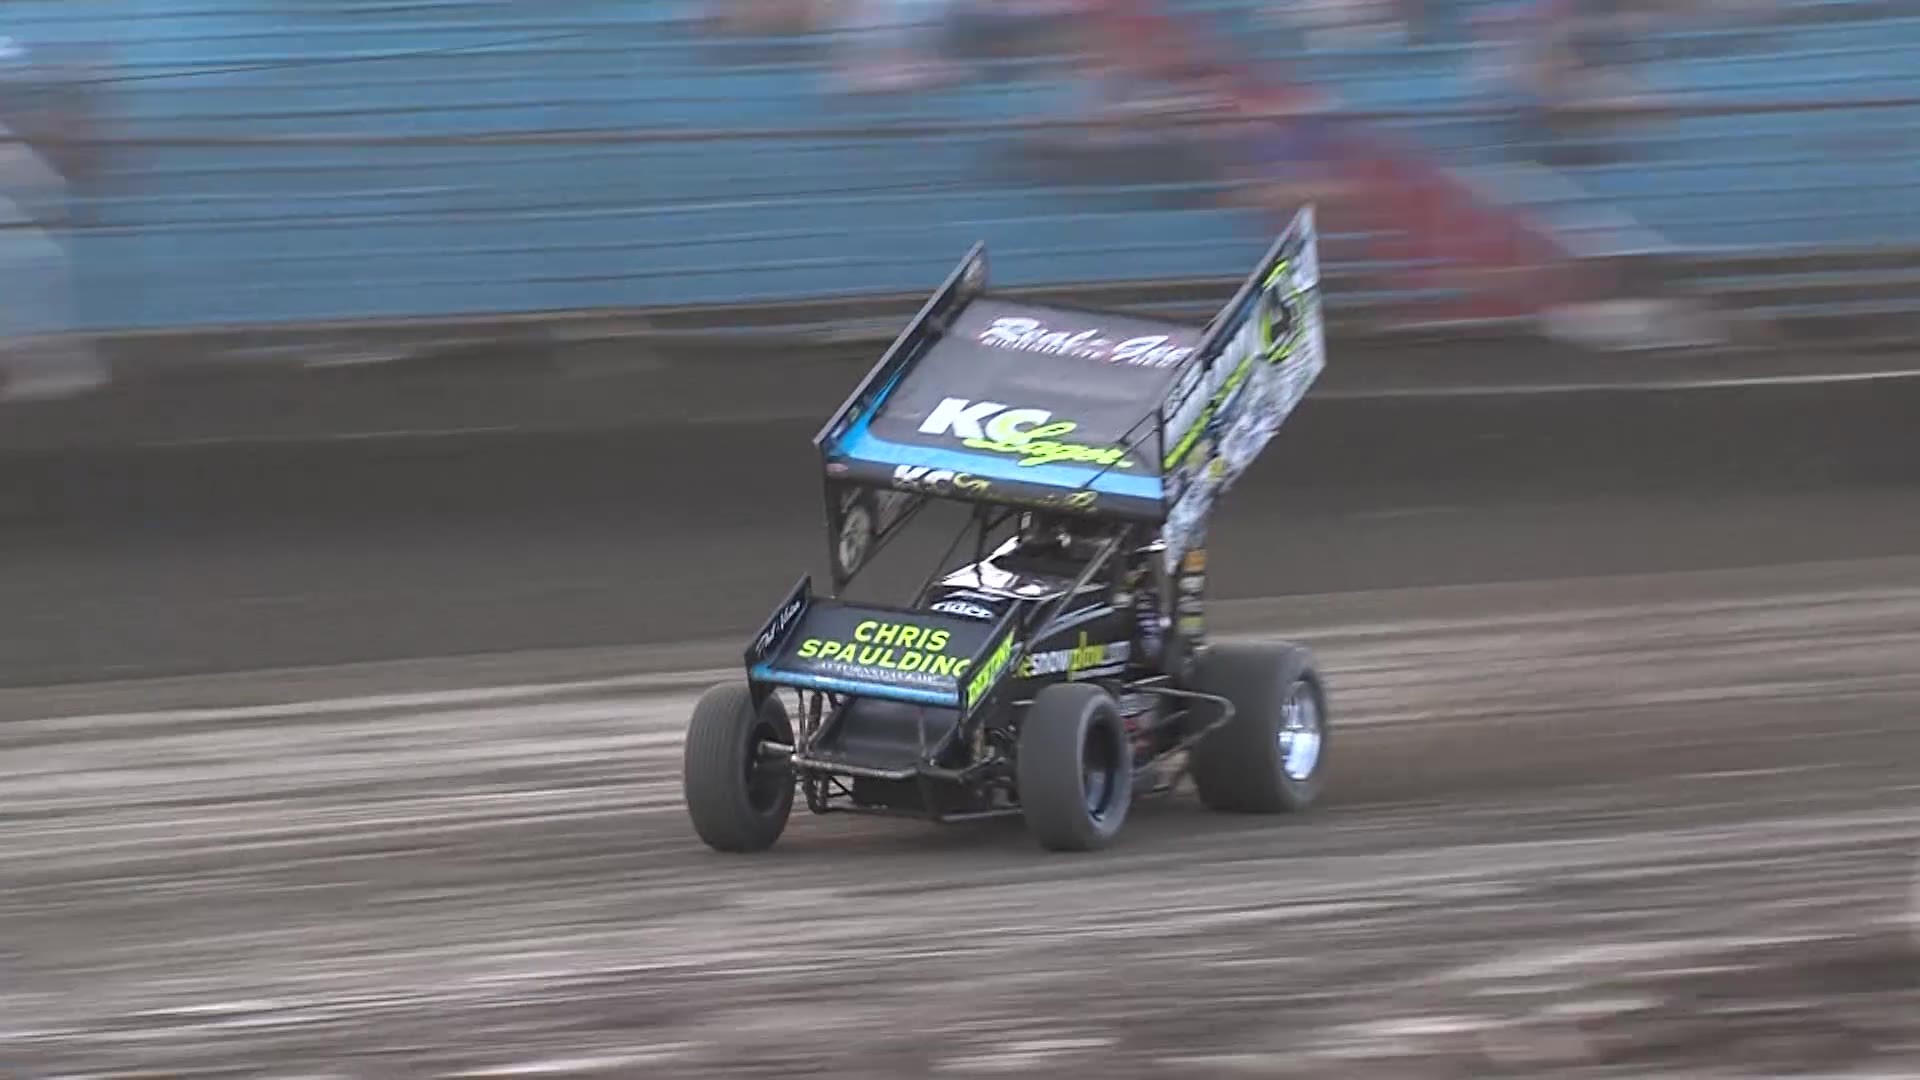 Videographer Kris Krohn in Tampa,FL with more from Sprint Car Driver Terry McCarl